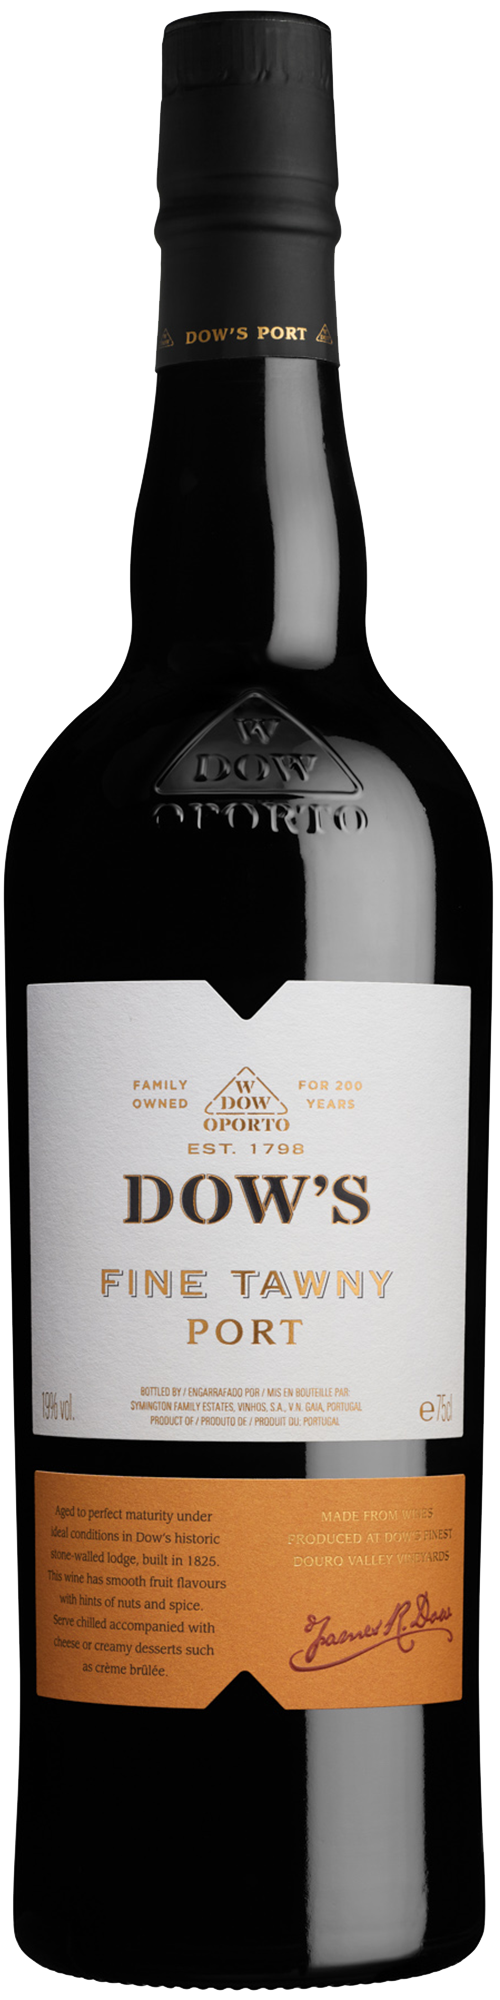 Product Image for DOW'S FINE TAWNY PORT 